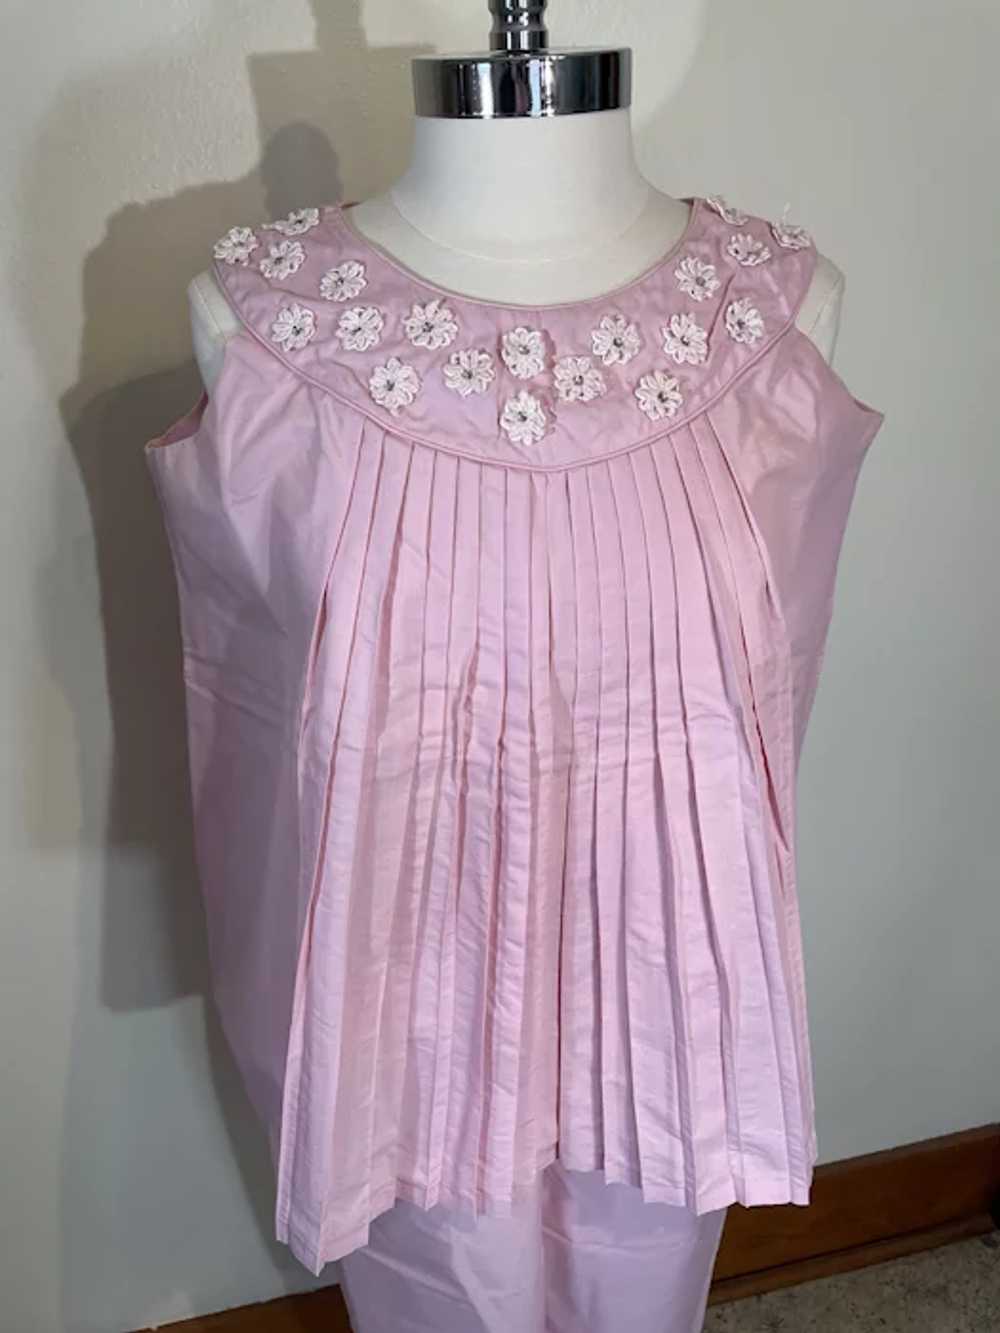 Vintage 1950s Pink Cotton Maternity Top and Skirt - image 5